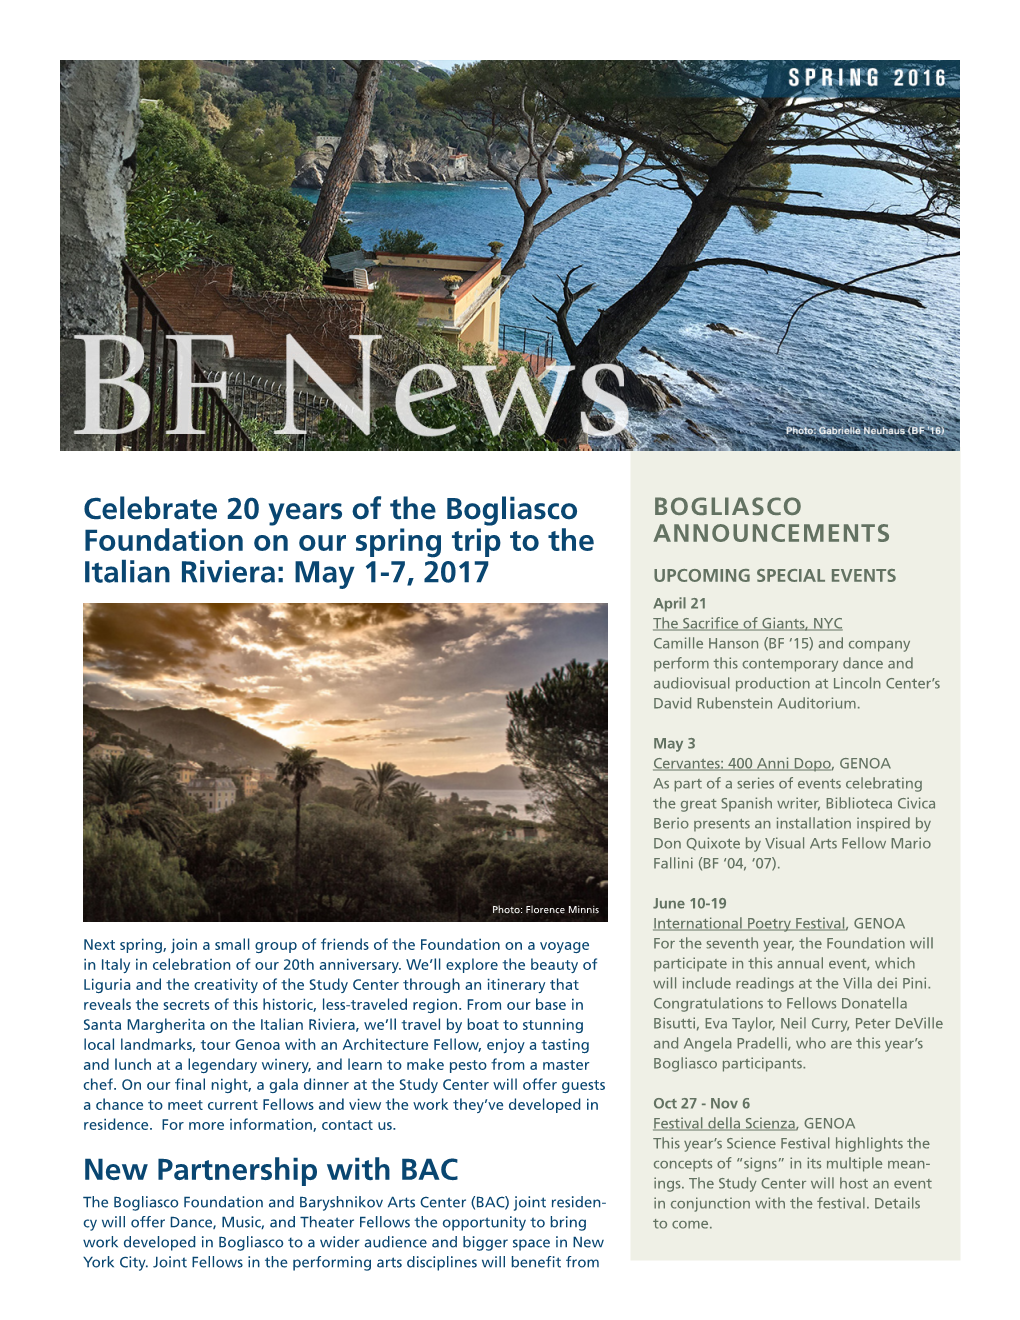 Celebrate 20 Years of the Bogliasco Foundation on Our Spring Trip to The